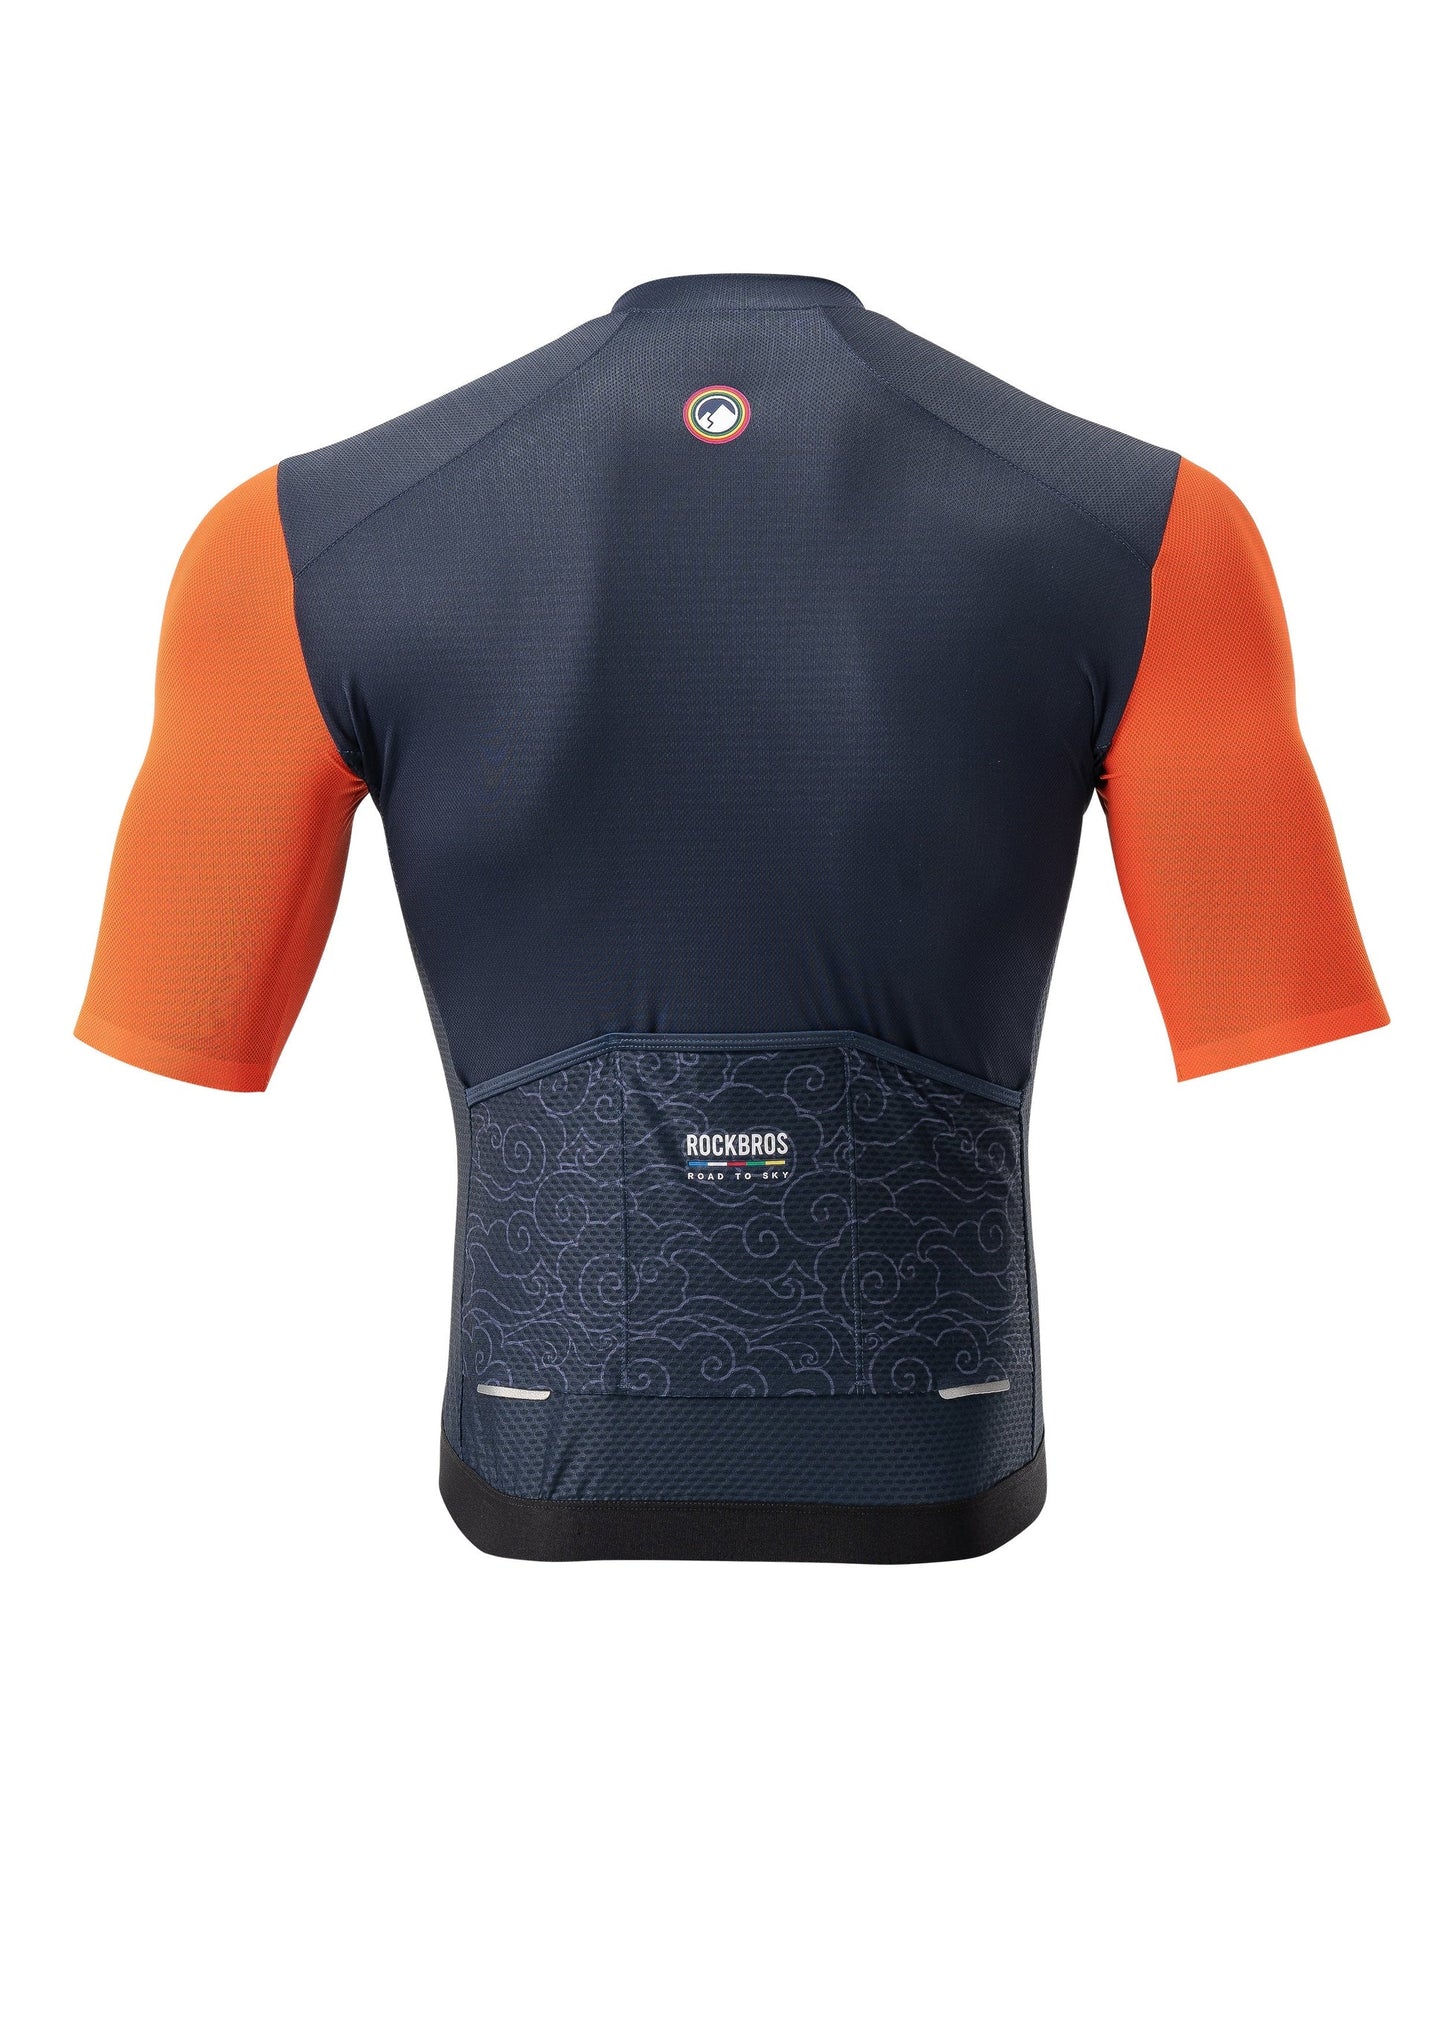 ROAD TO SKY Men's Cycling Short-Sleeved Jersey